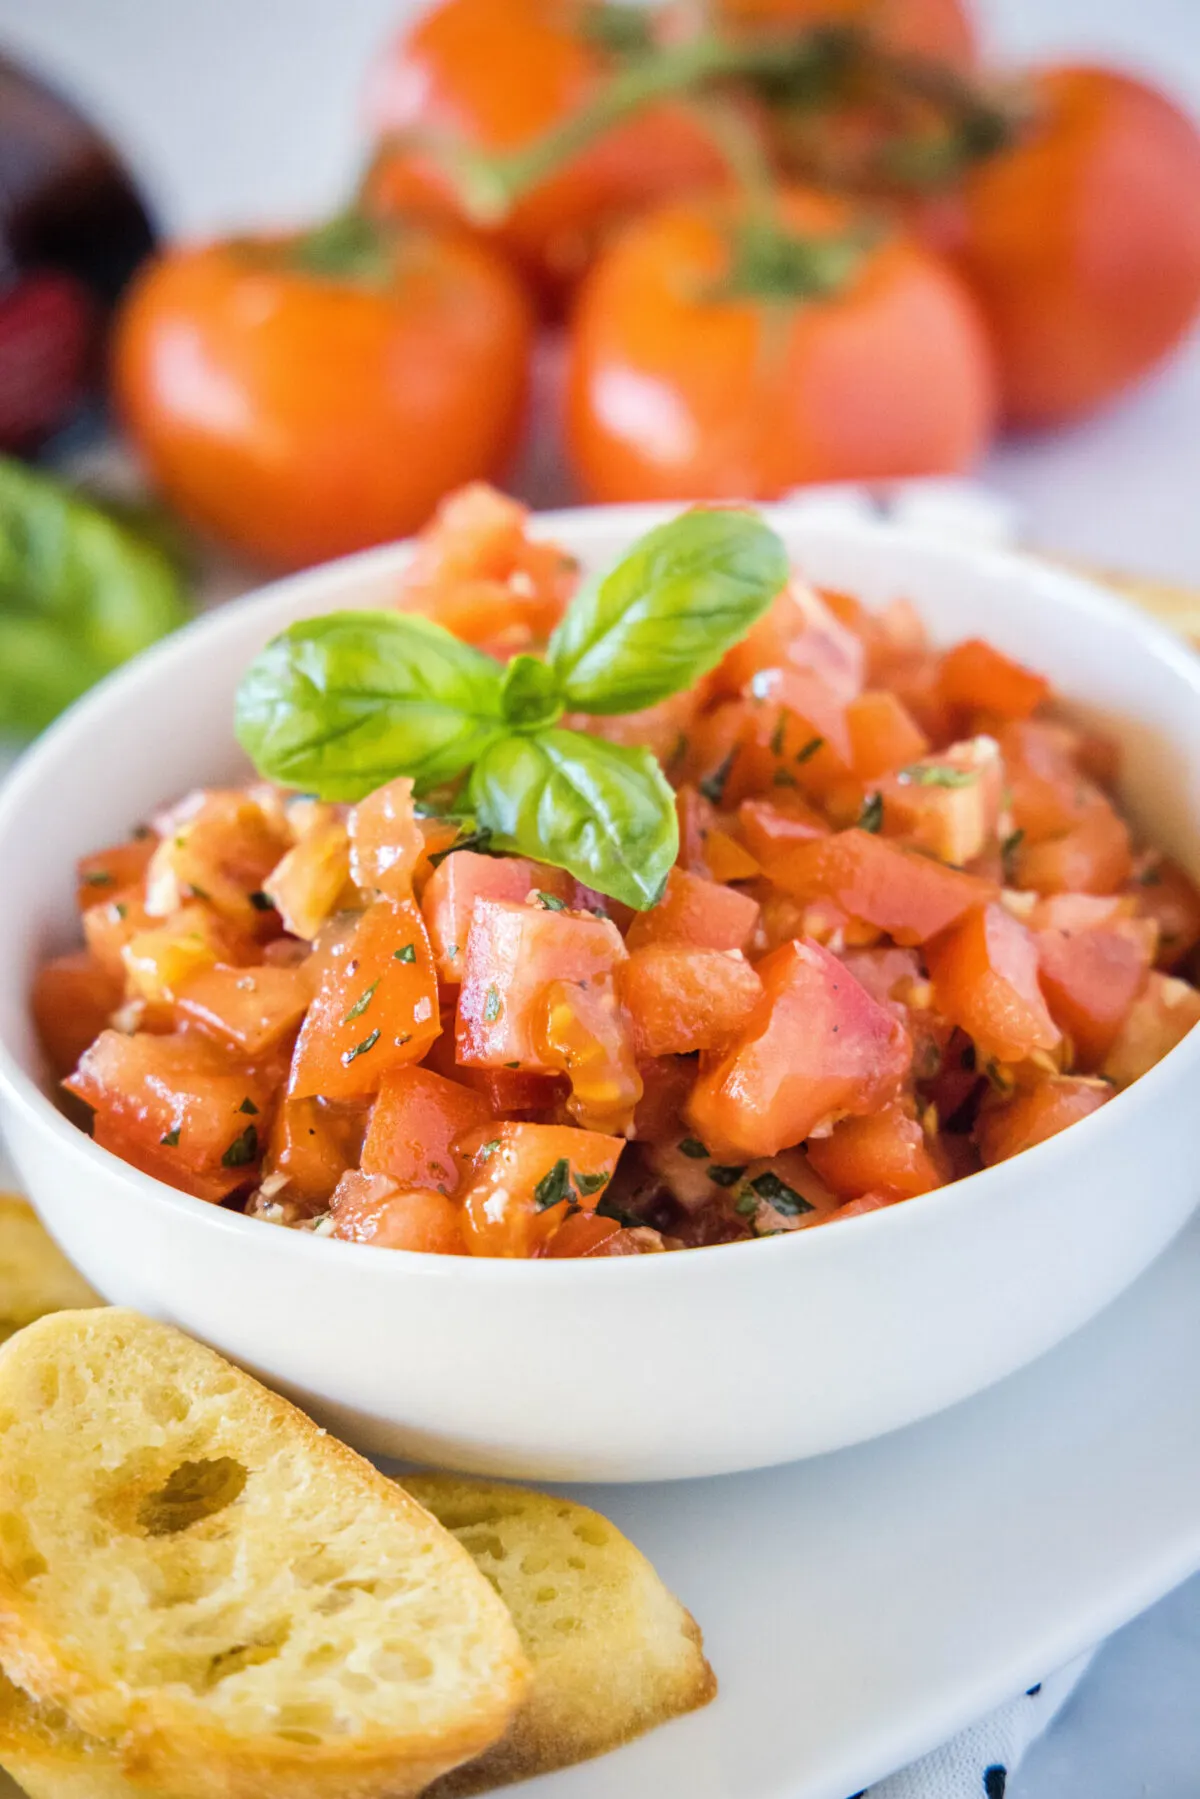 A bowl of bruschetta filling topped with basil, with bread slices in the foreground and tomatoes in the background